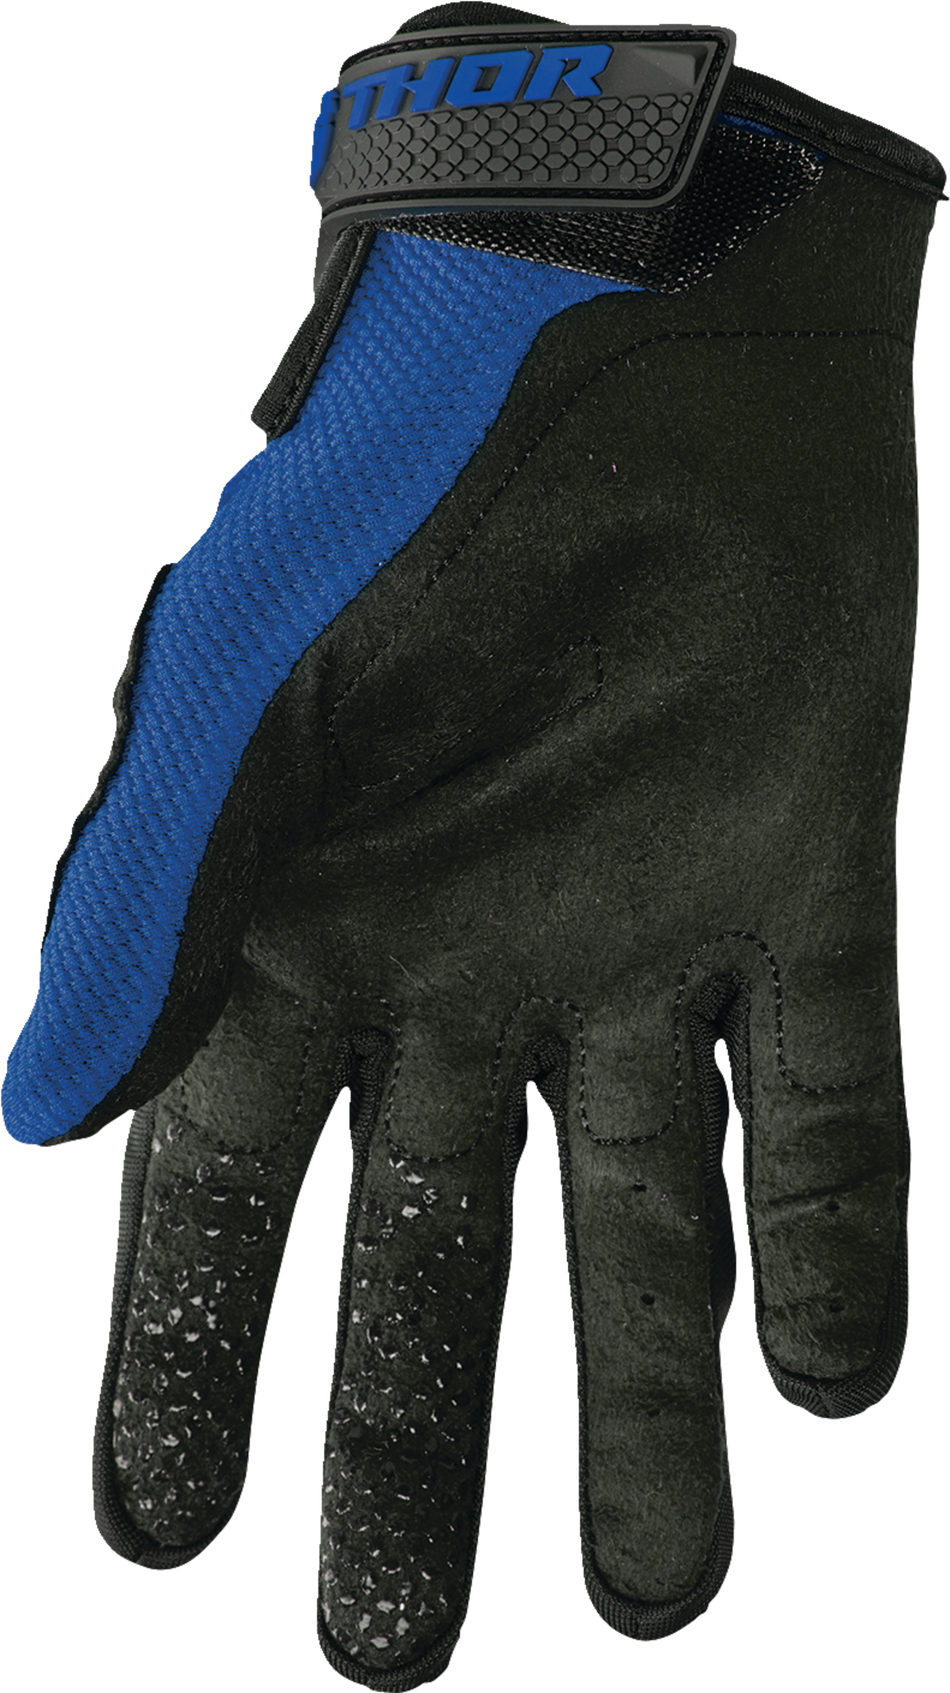 THOR Sector Gloves - Navy/White - XS 3330-7261